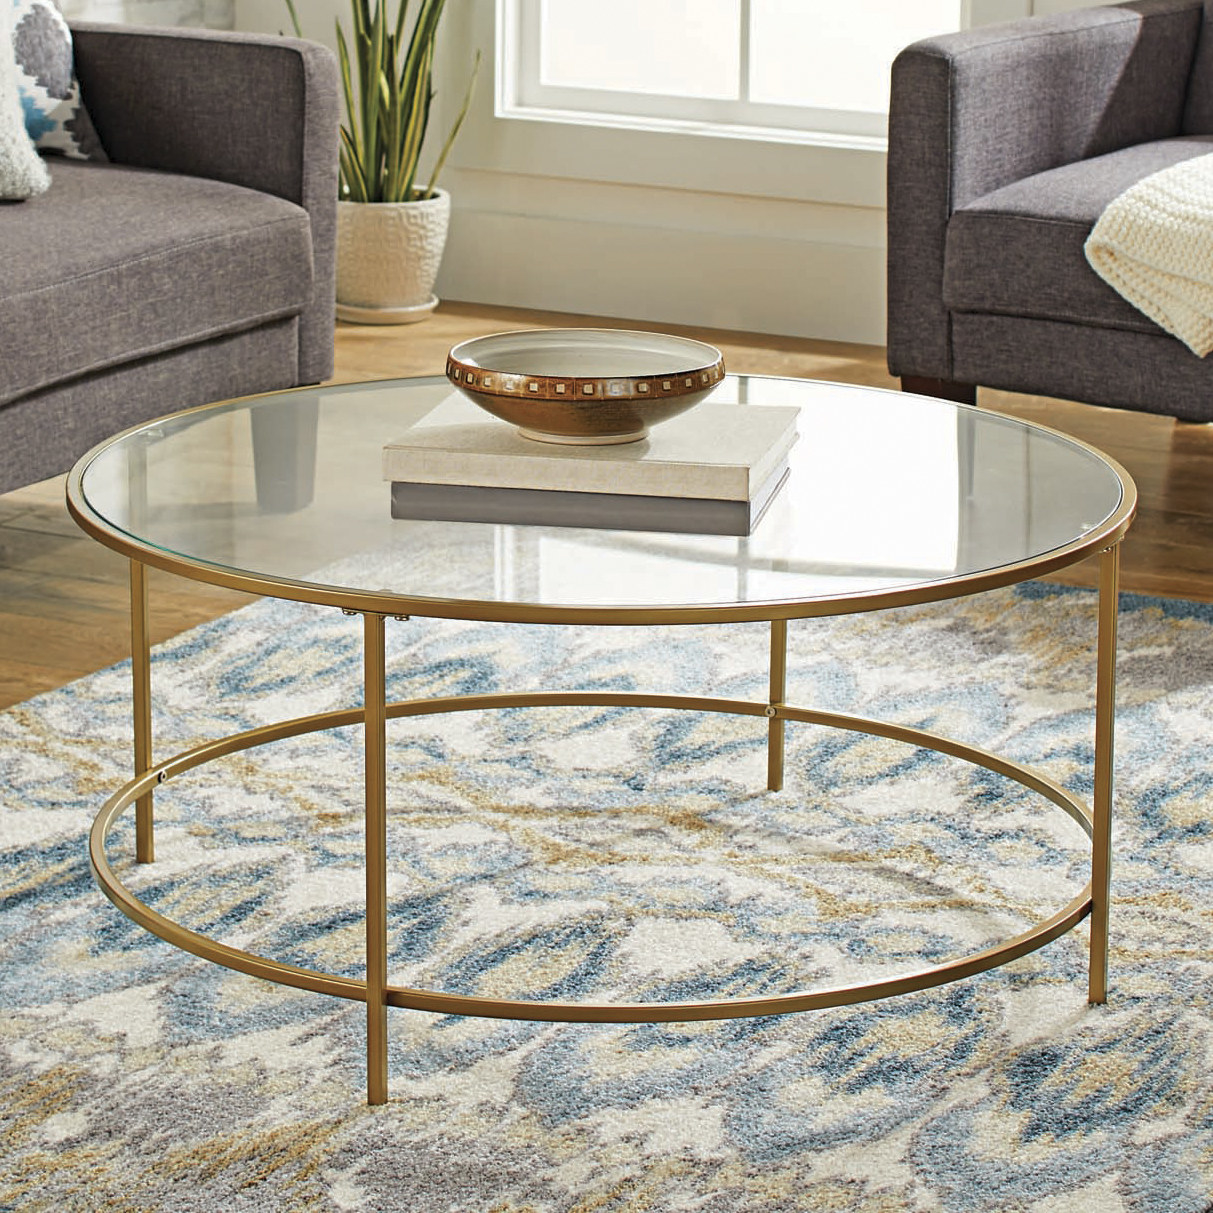 Coffee table in the gold finish, shown in a living room.